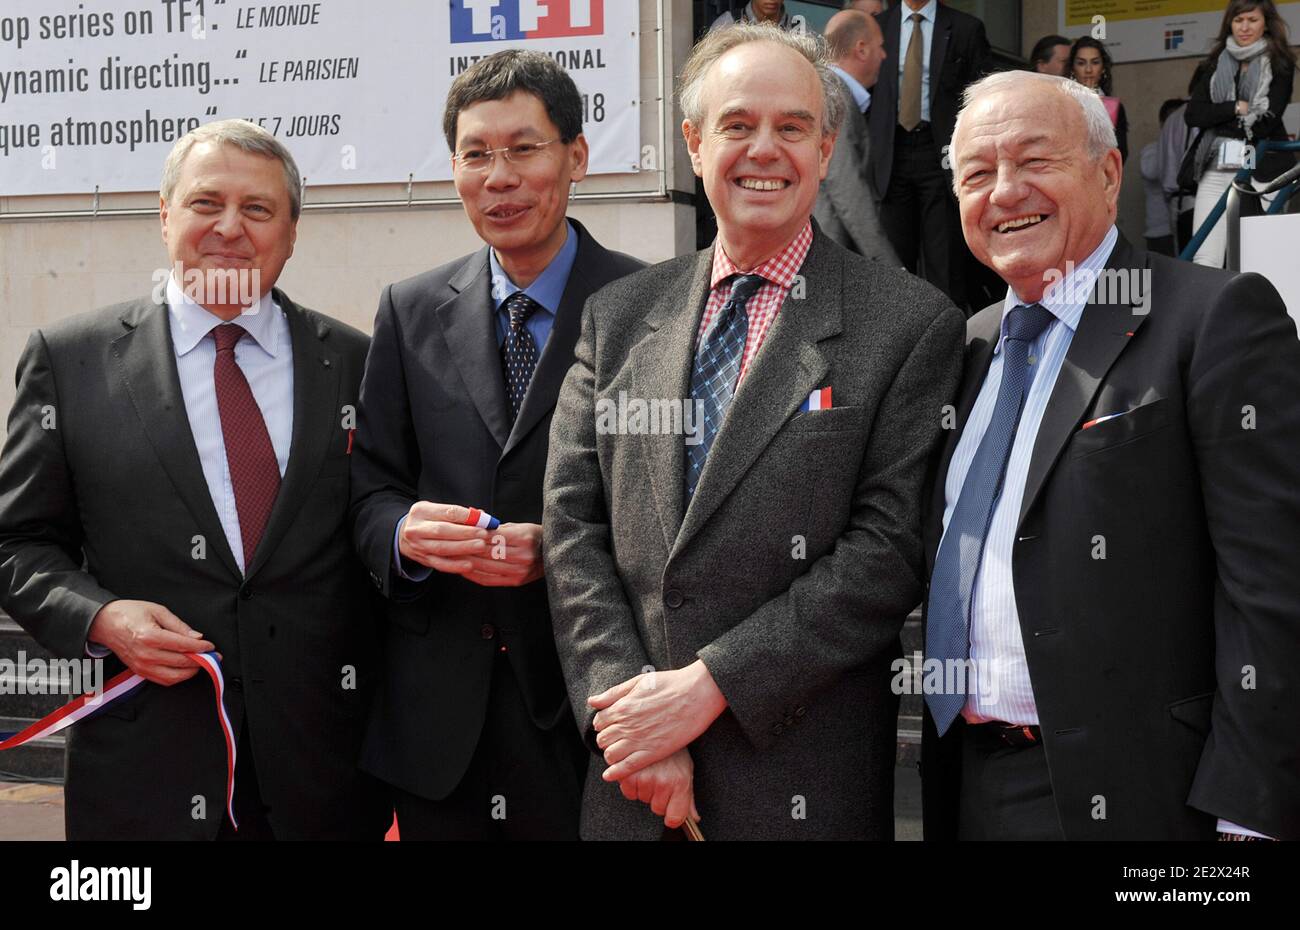 French culture minister Frederic Mitterrand and Cannes Mayor Bernard Brochand attending the opening of the MIPTV 2010 in Cannes, France on April 12, 2010. Photo by Giancarlo Gorassini/ABACAPRESS.COM Stock Photo